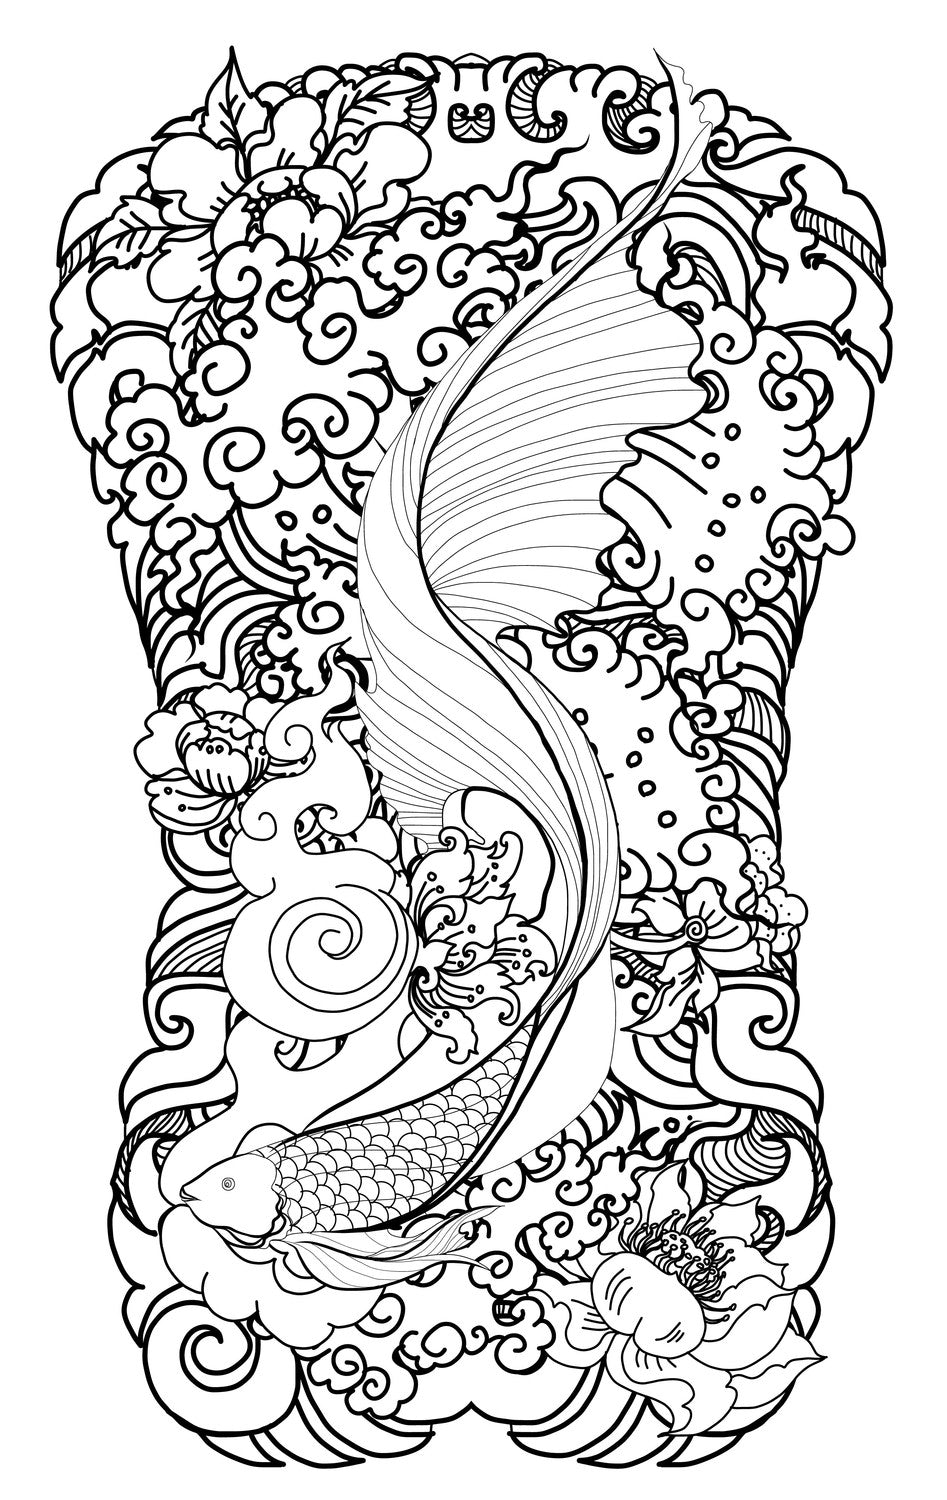 Thai Tattoos - Decorated Dragons, Birds, Snakes and Fish, Detailed Patterns - PDF Book